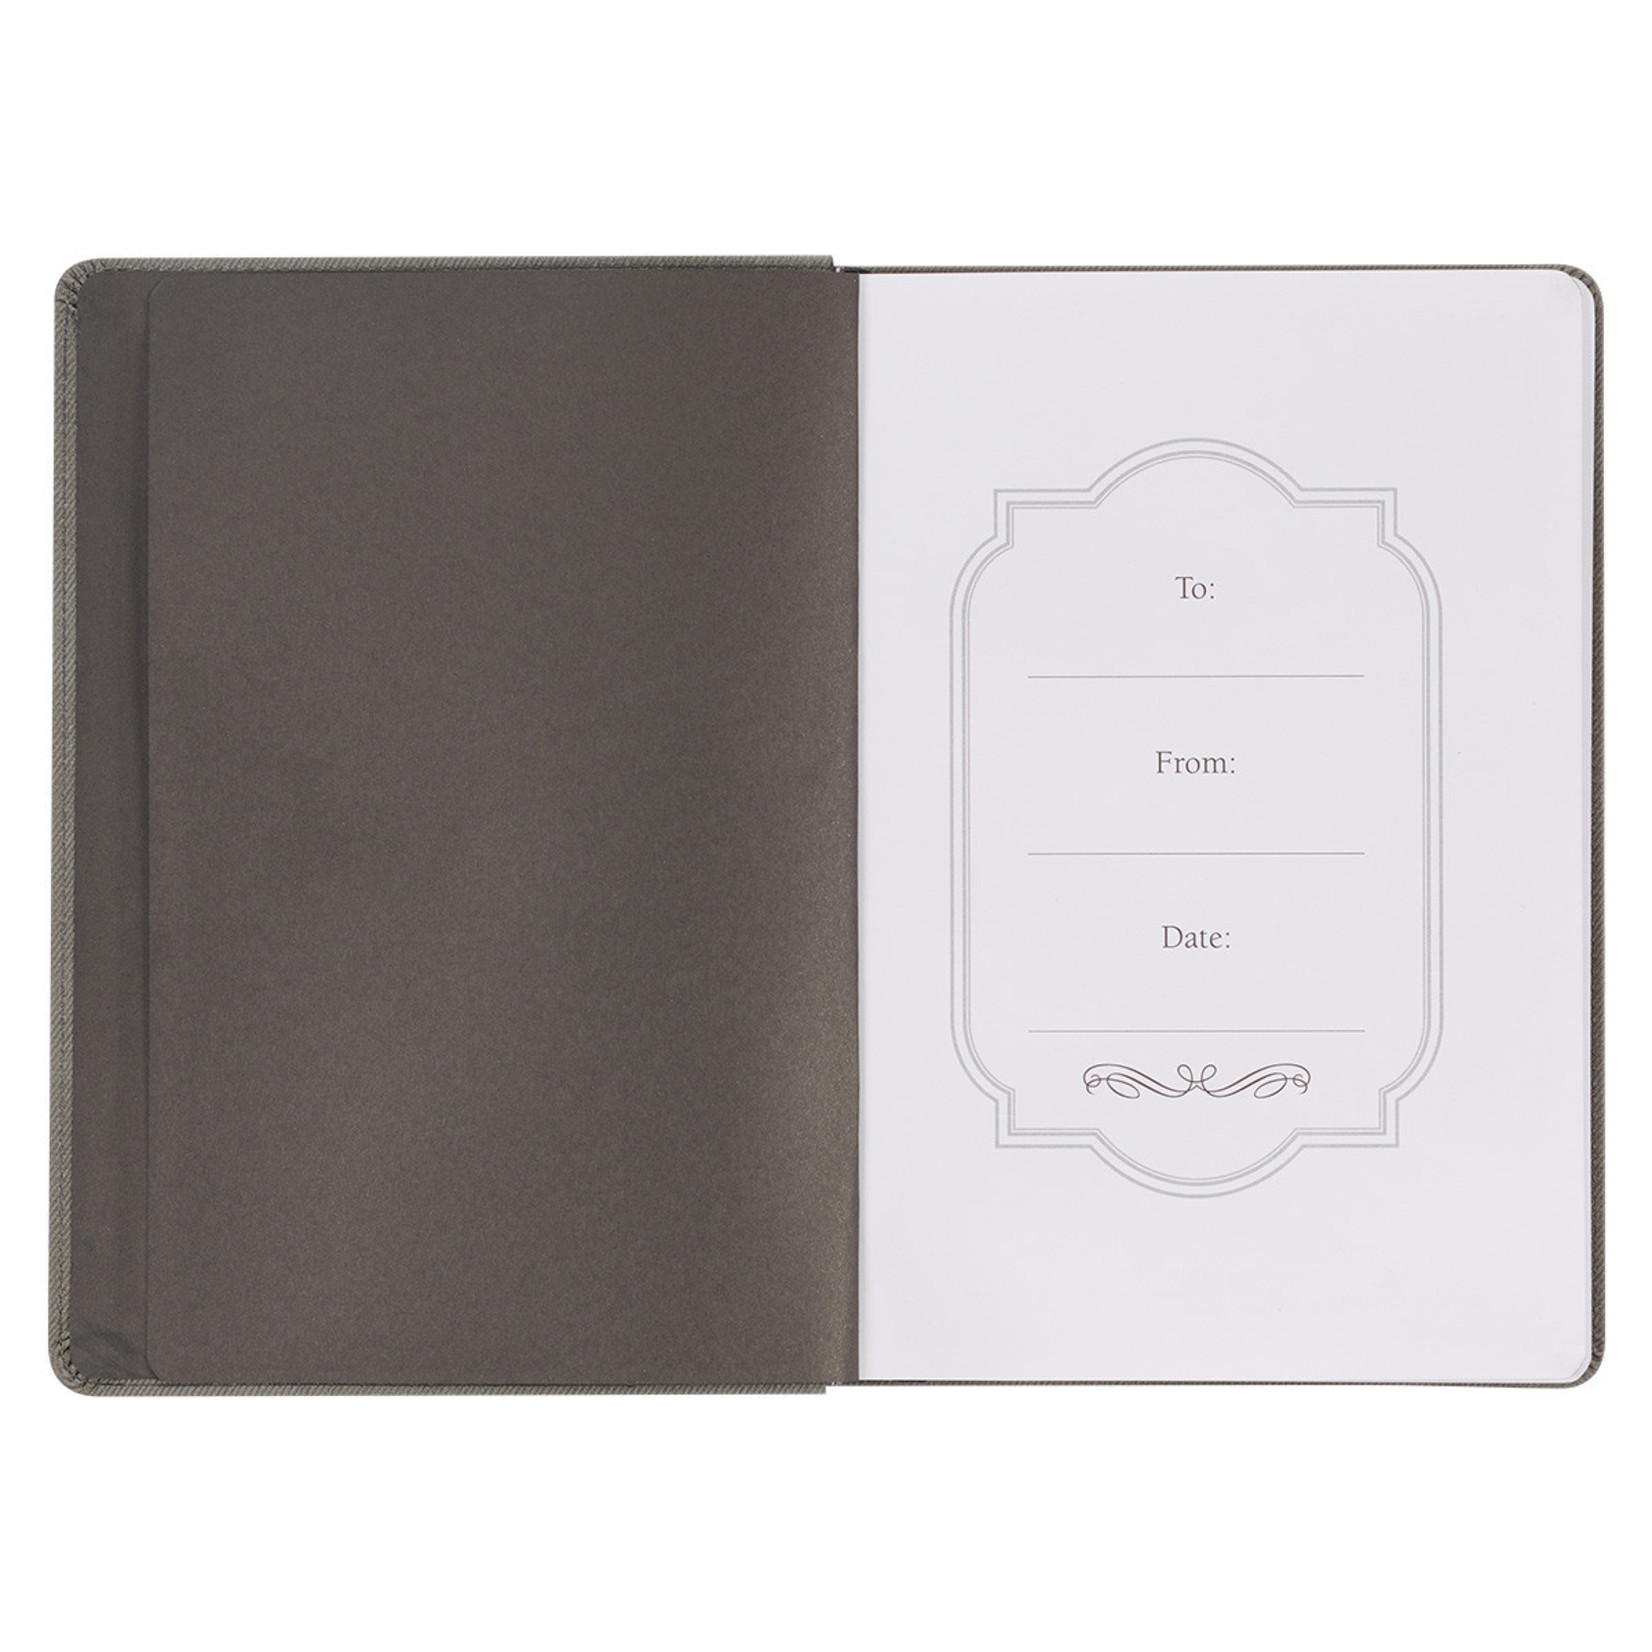 Christian Art Gifts Hope in the LORD Gray Faux Leather Classic Journal - Isaiah 40:31